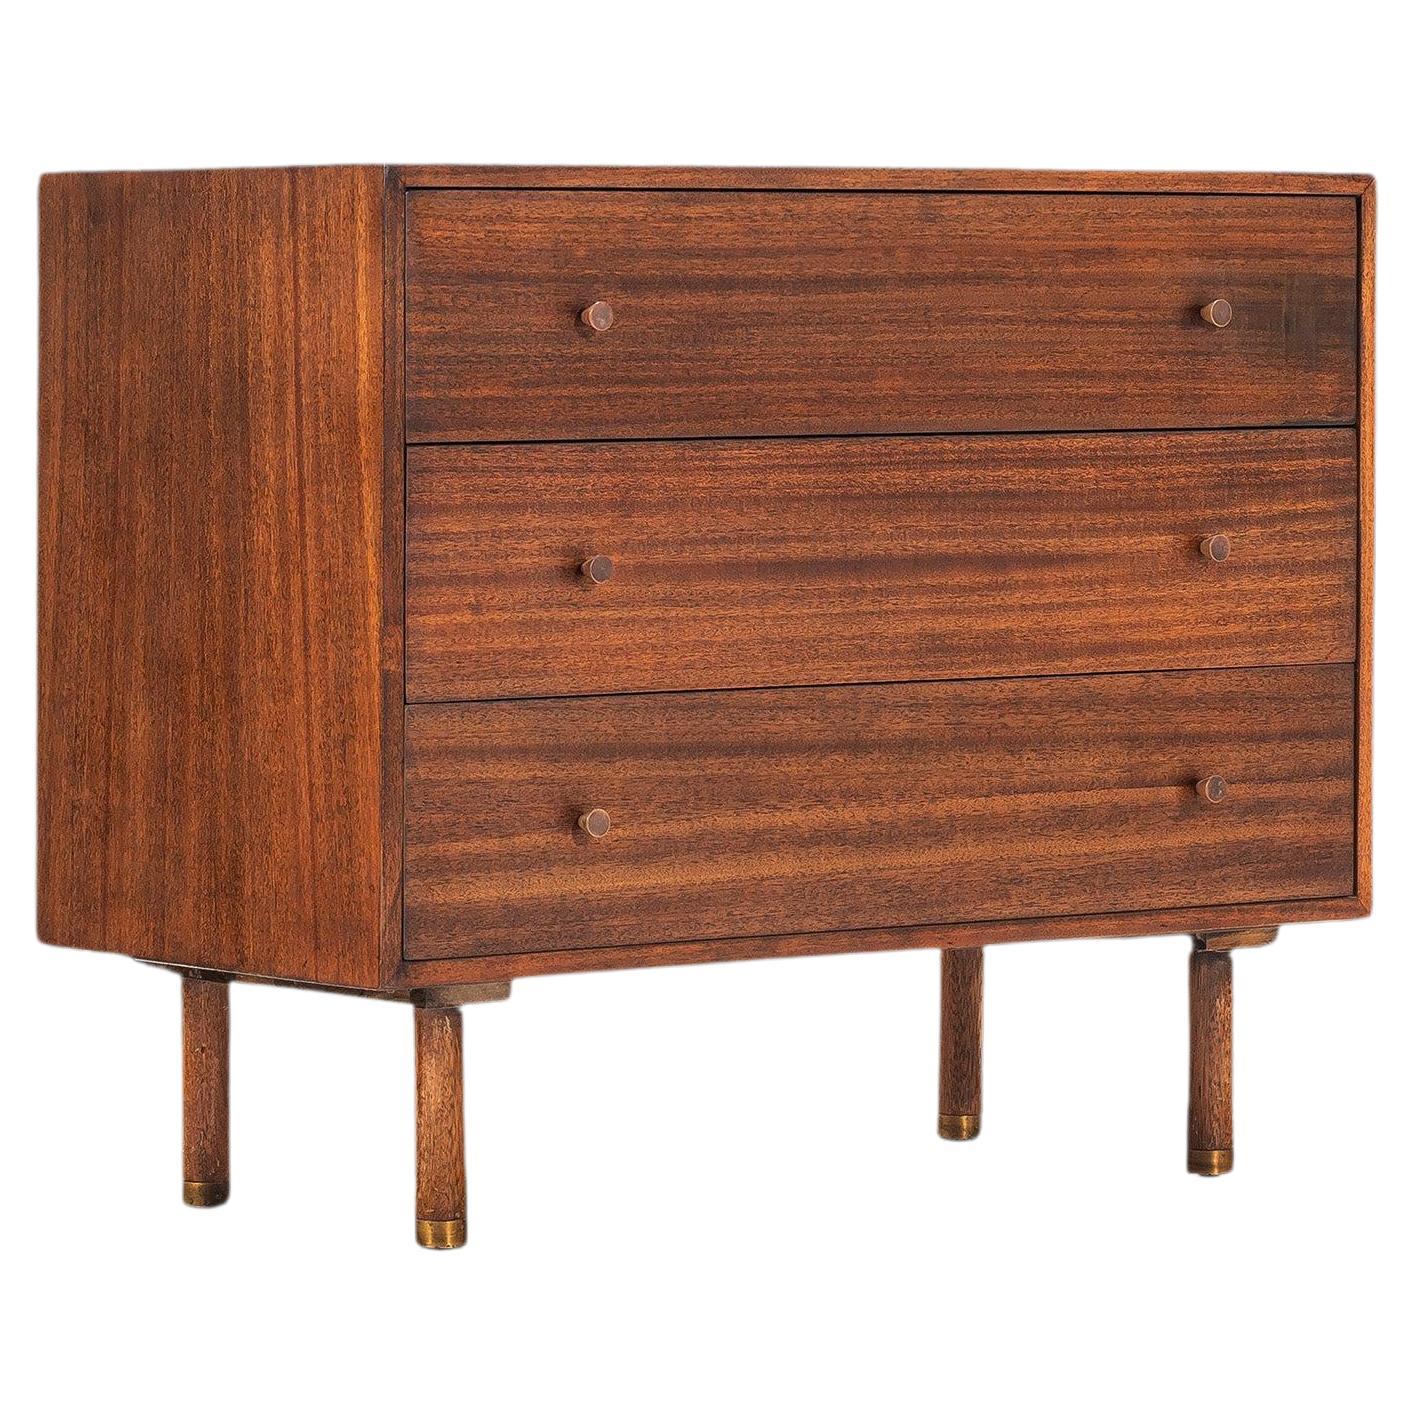 Rare Mid-Century Modern Three-Drawer Dresser in Mahogany by Harvey Probber, USA For Sale